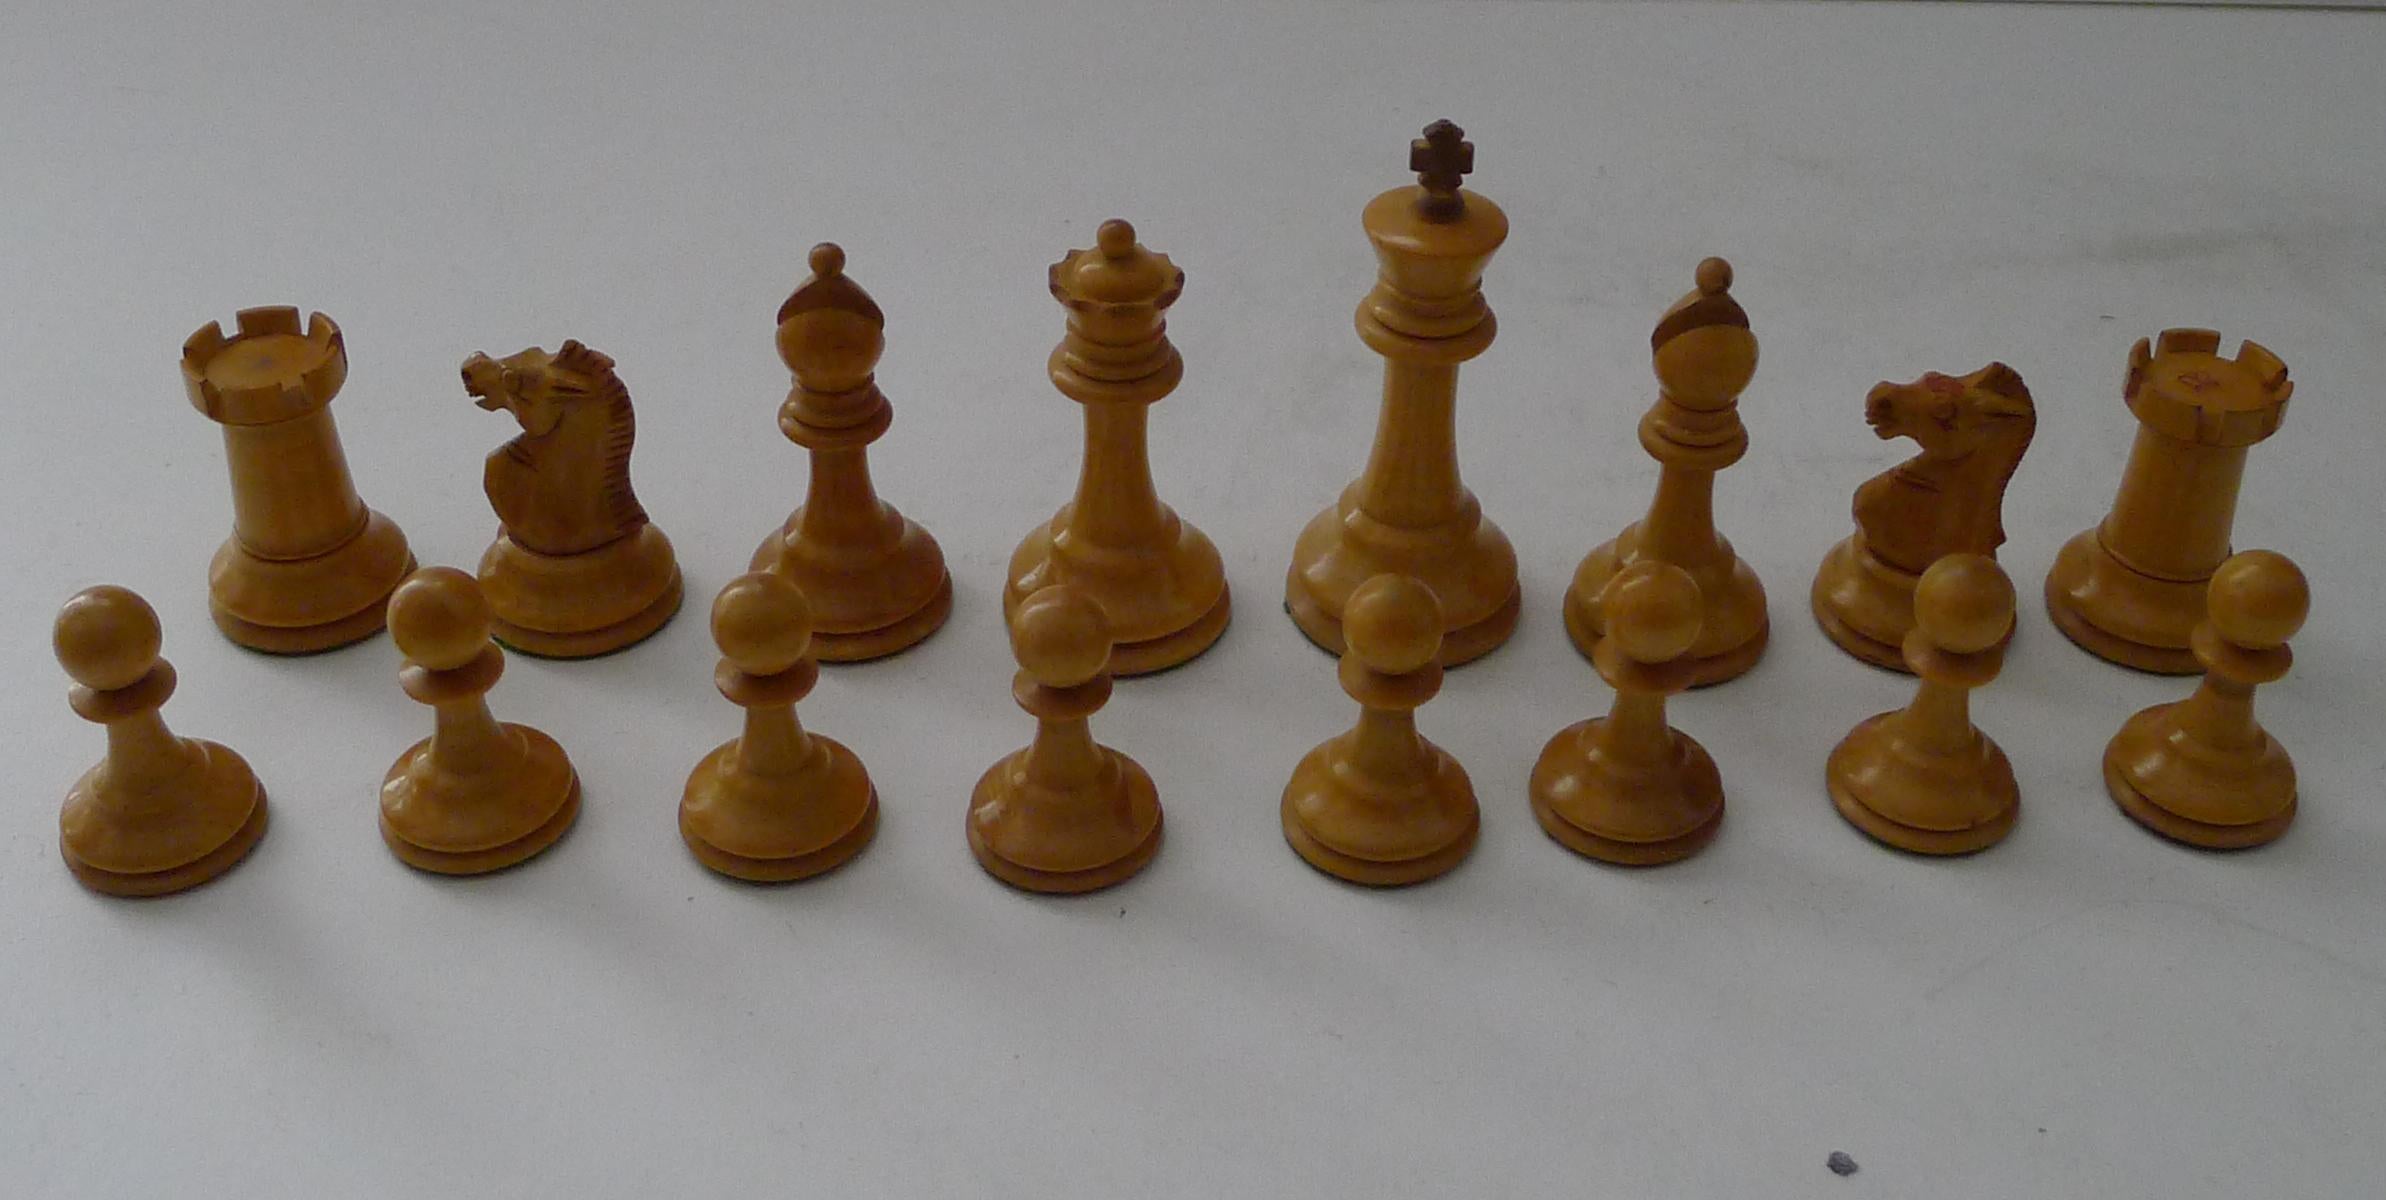 Edwardian Antique English Staunton Chess Set With Red Crown Marks c.1900 For Sale